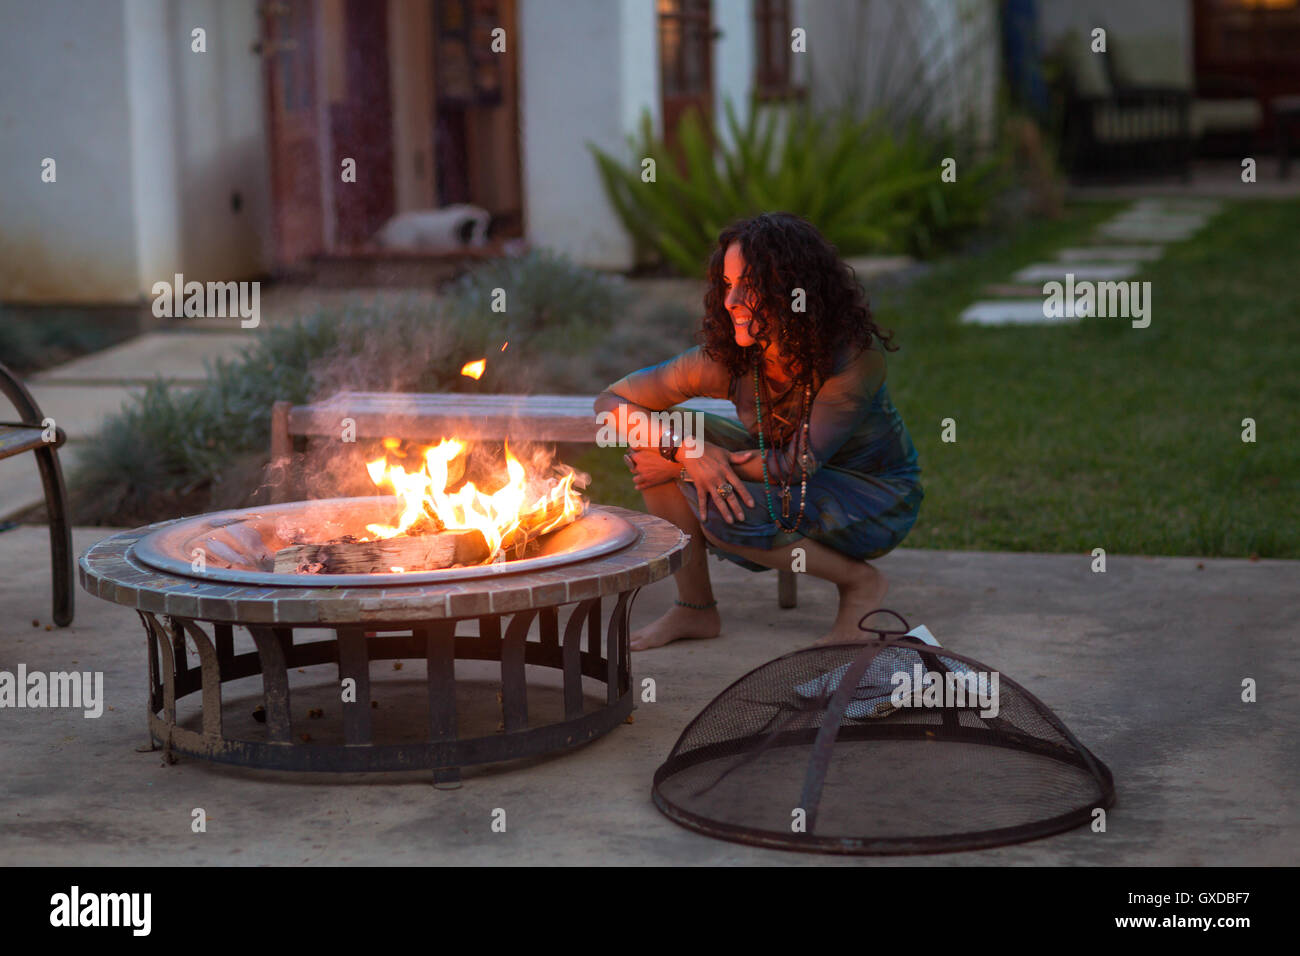 Mature woman crouching in front of patio fire at dusk Stock Photo